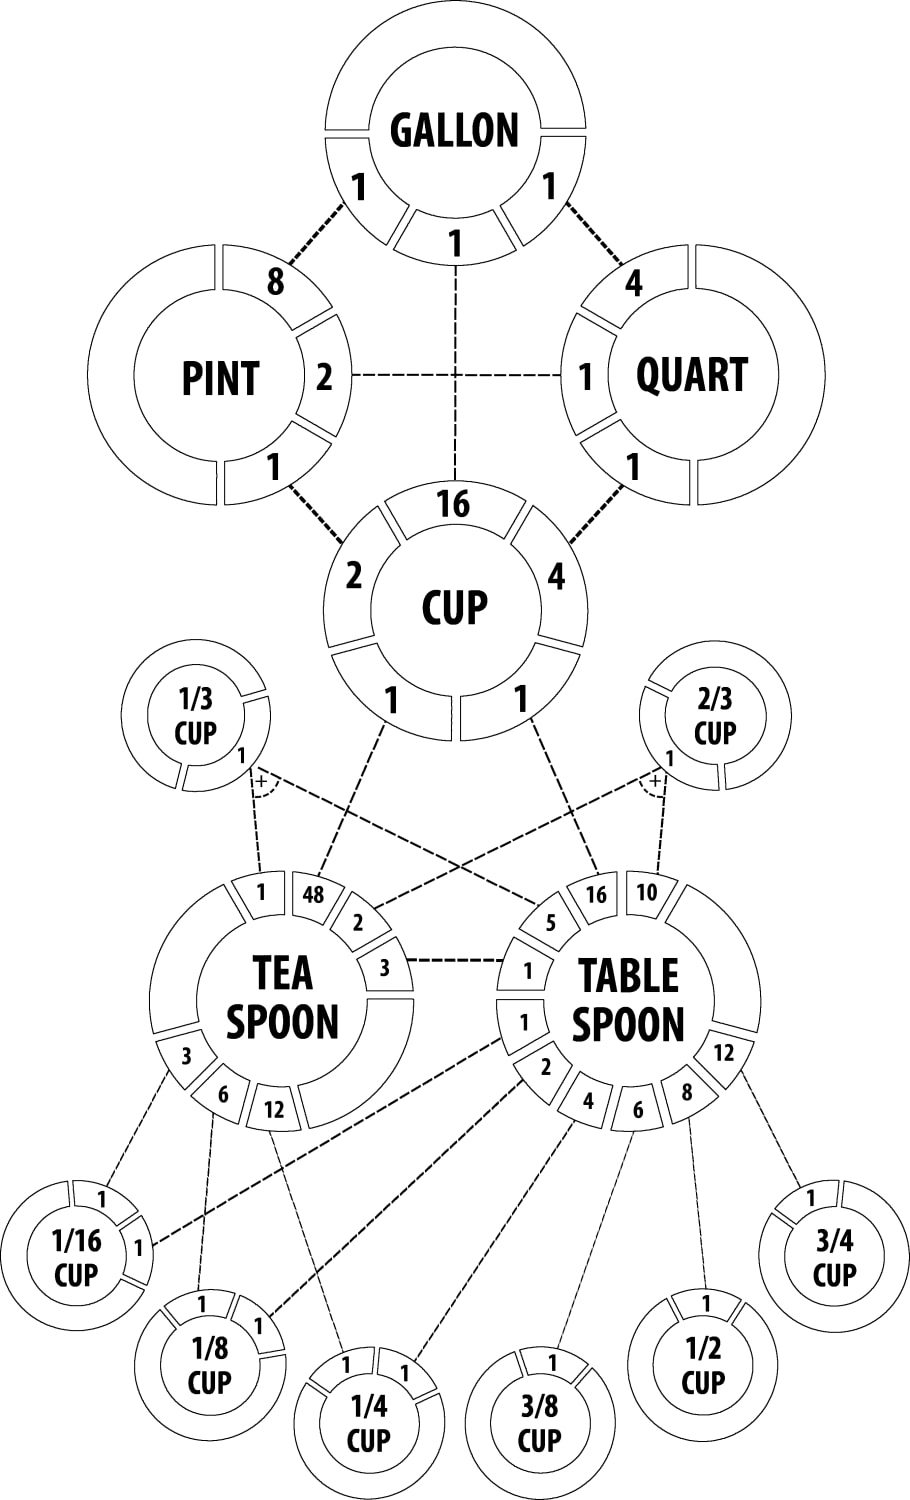 The relationships between various measures, ranging from gallons to tea spoon.